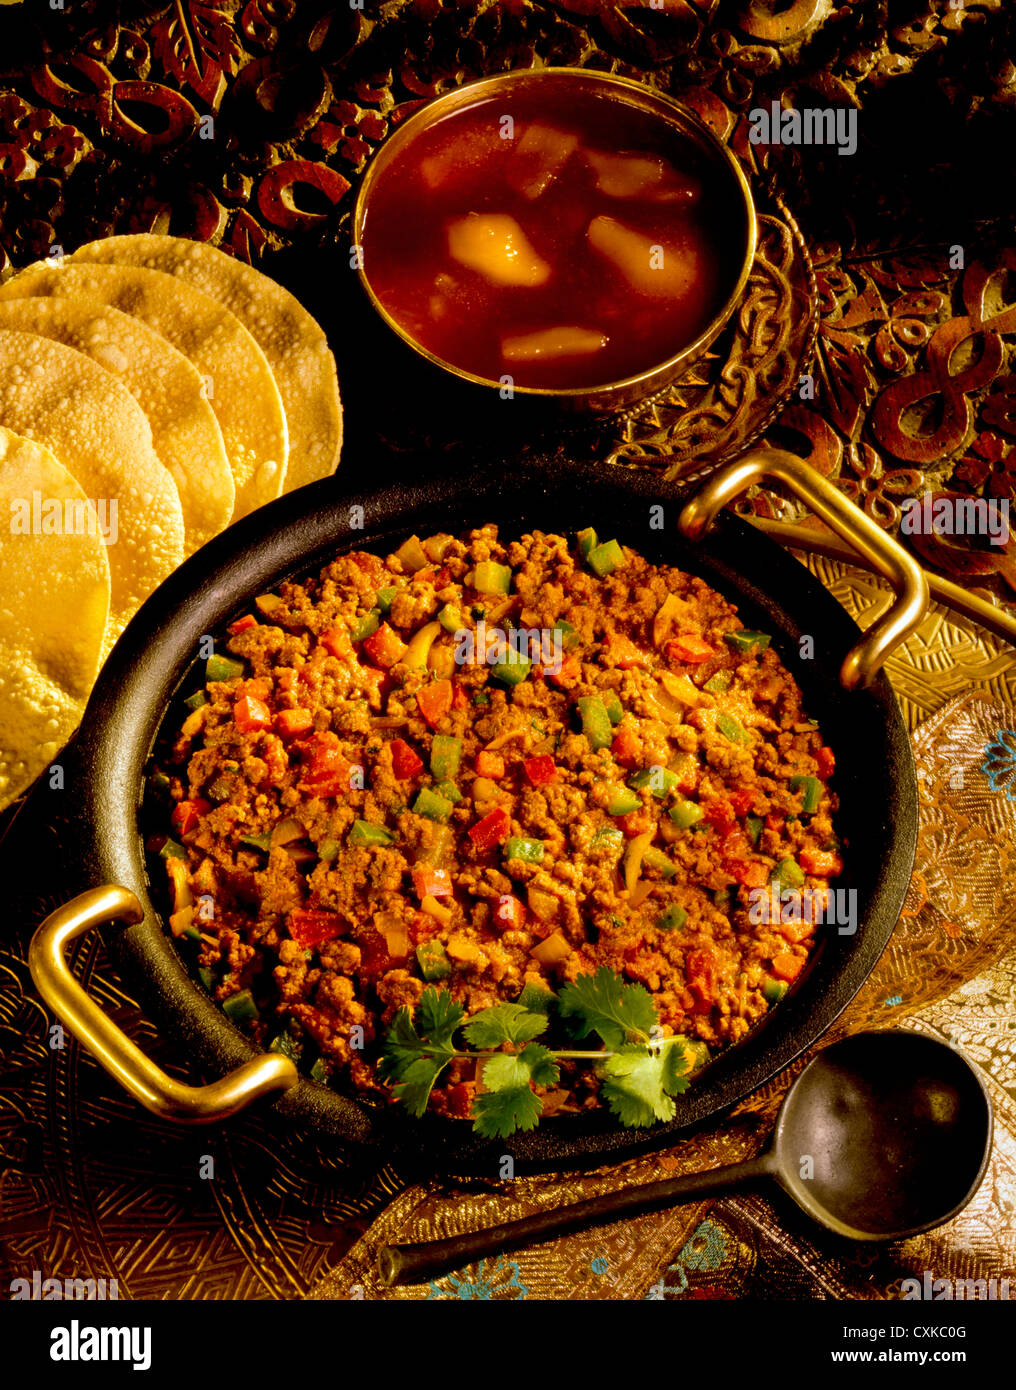 INDIAN CURRY DISH Stock Photo